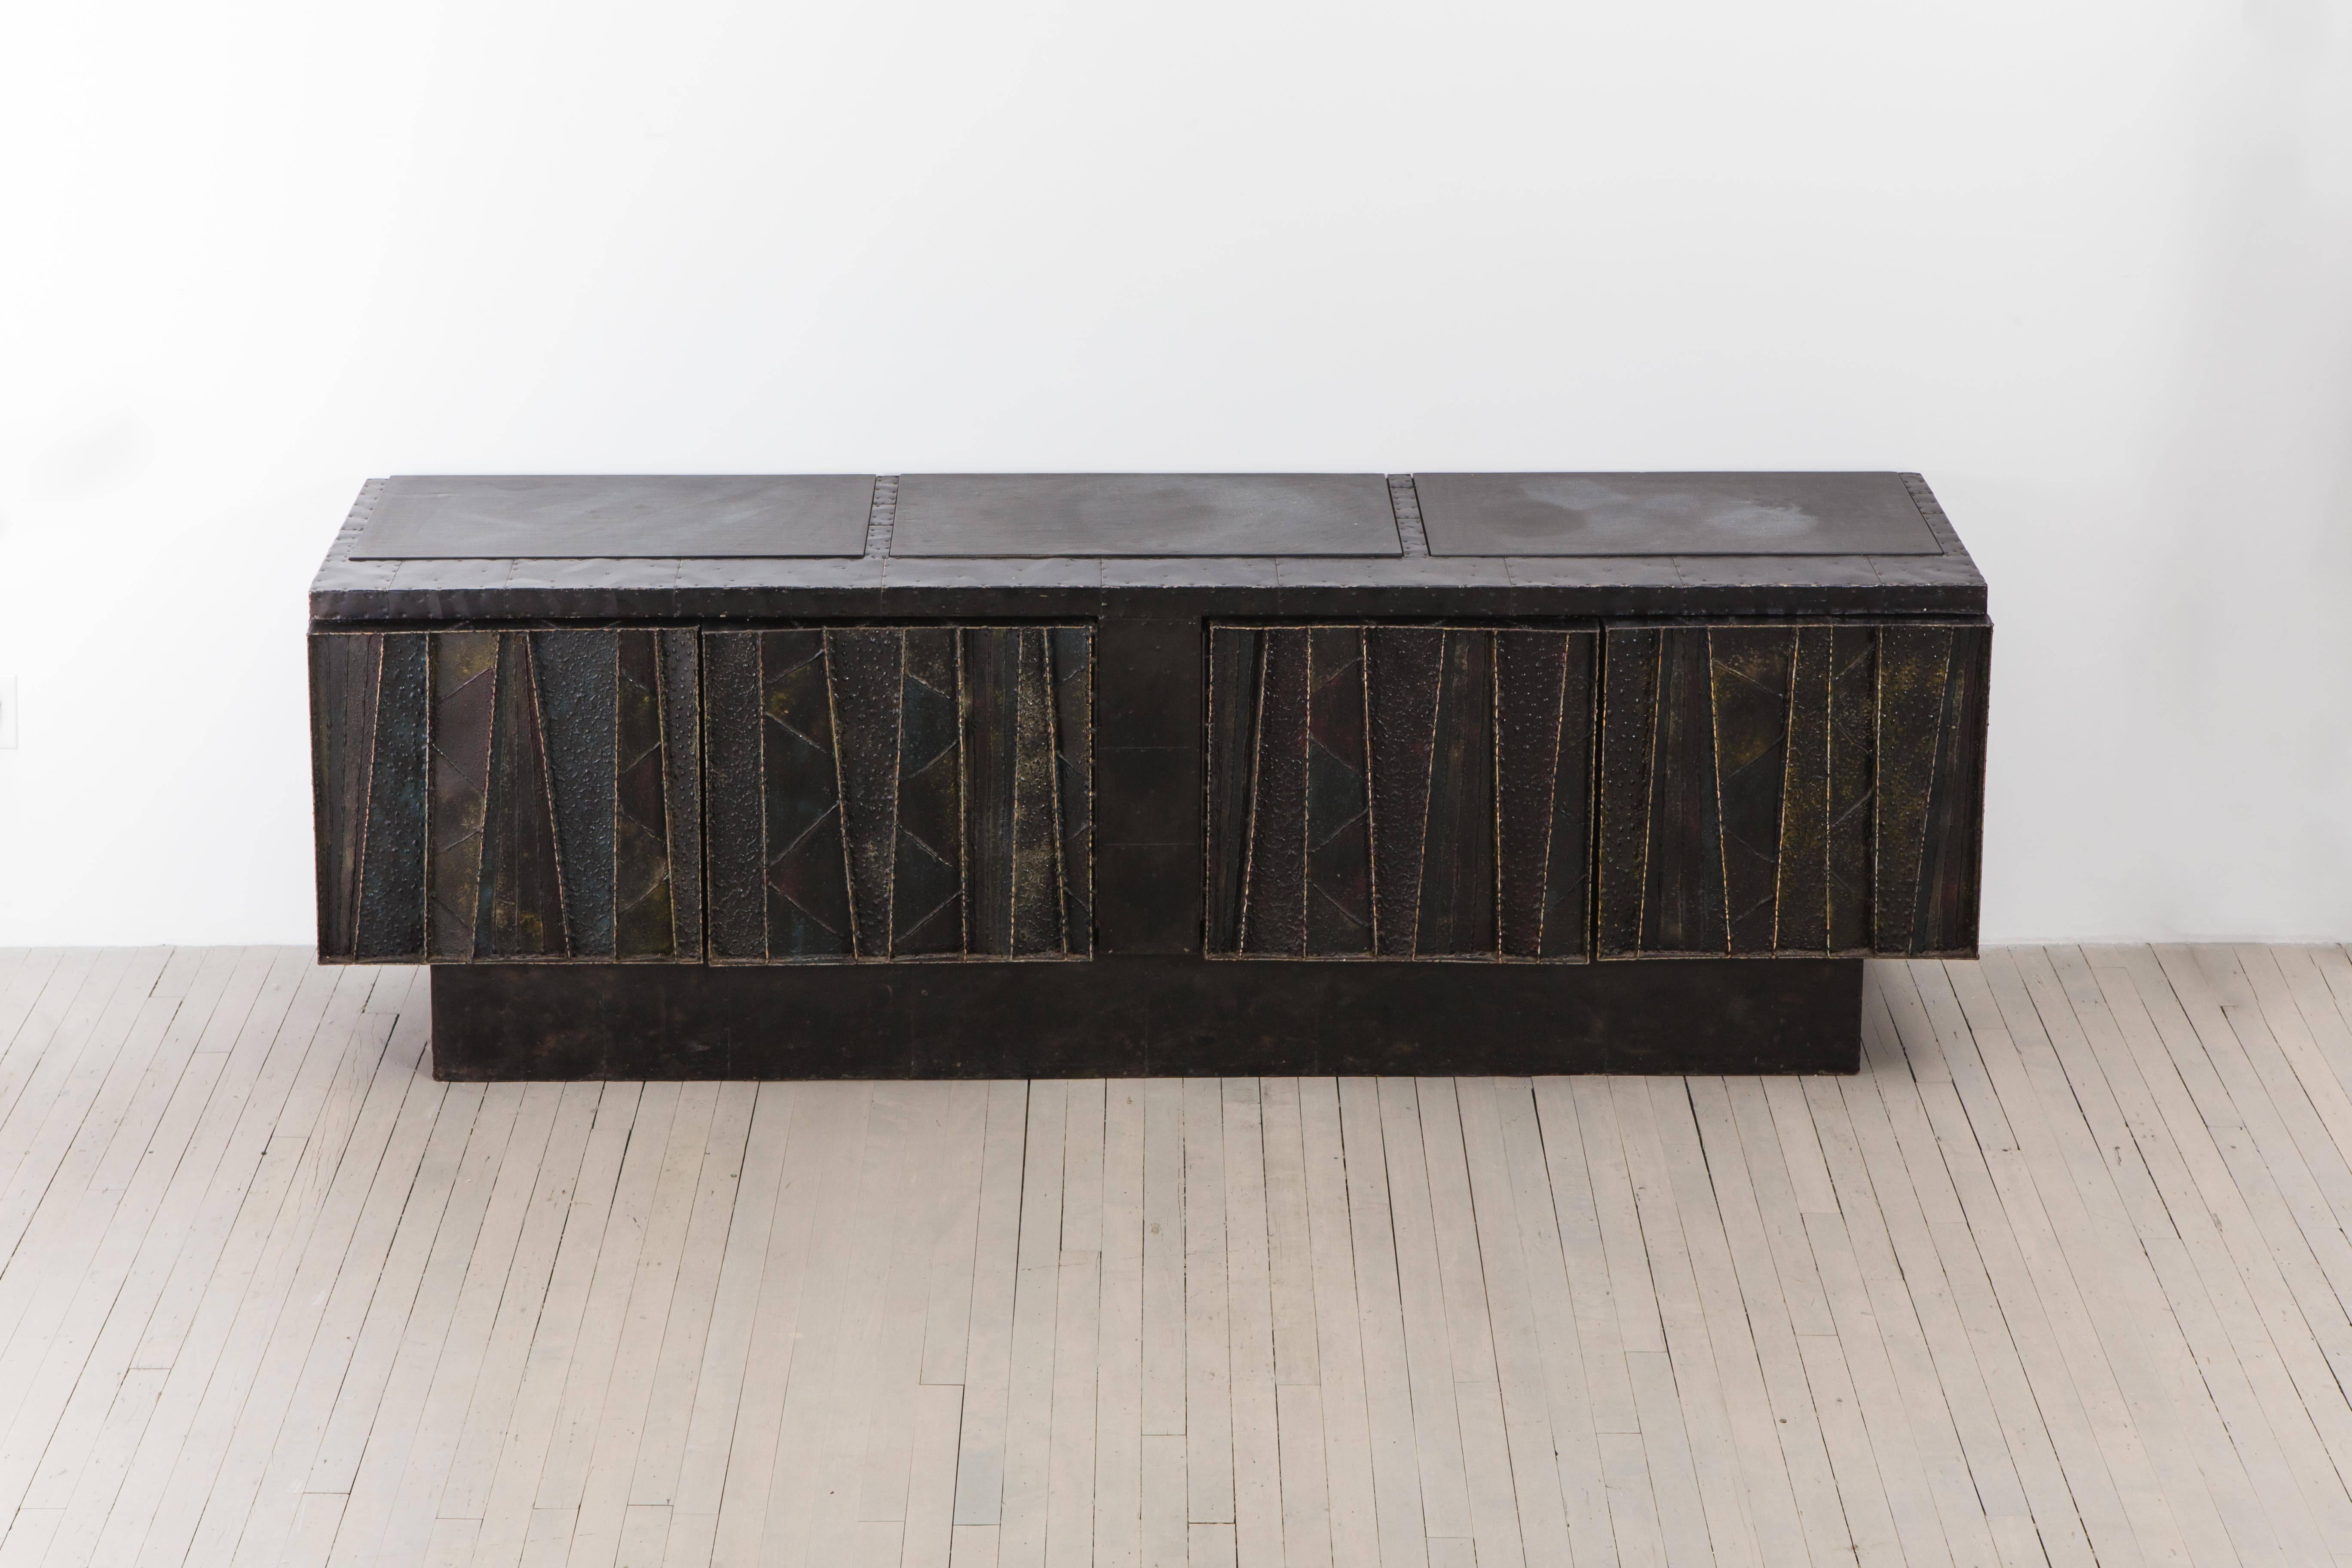 An outstanding example of an Evans' welded steel sculptural designs, this unique console is rendered in a polychrome steel, patinated bronze, cleft slates and wood. Exquisite jewel-toned colors fill a smokey grey/black pigmented ground with the